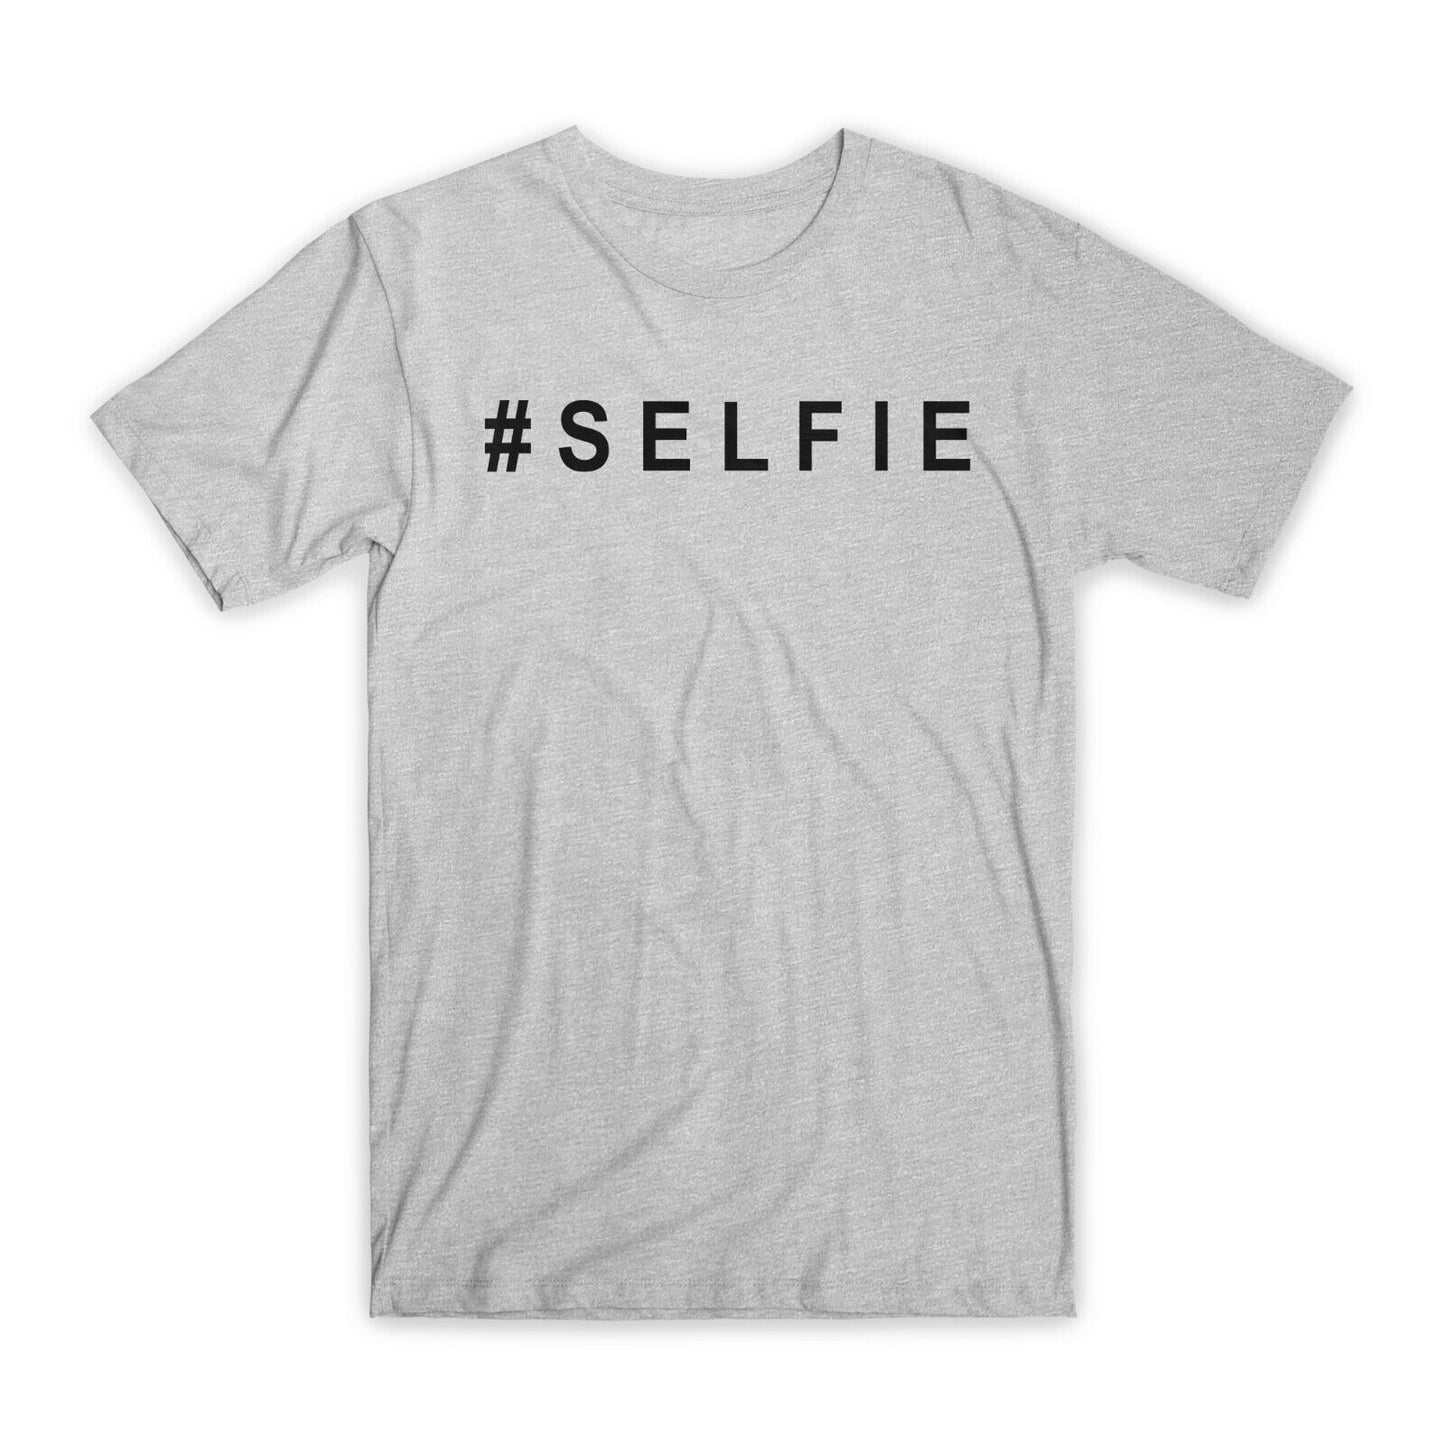 #Selfie Printed T-Shirt Premium Soft Cotton Crew Neck Funny Tee Novelty Gift NEW